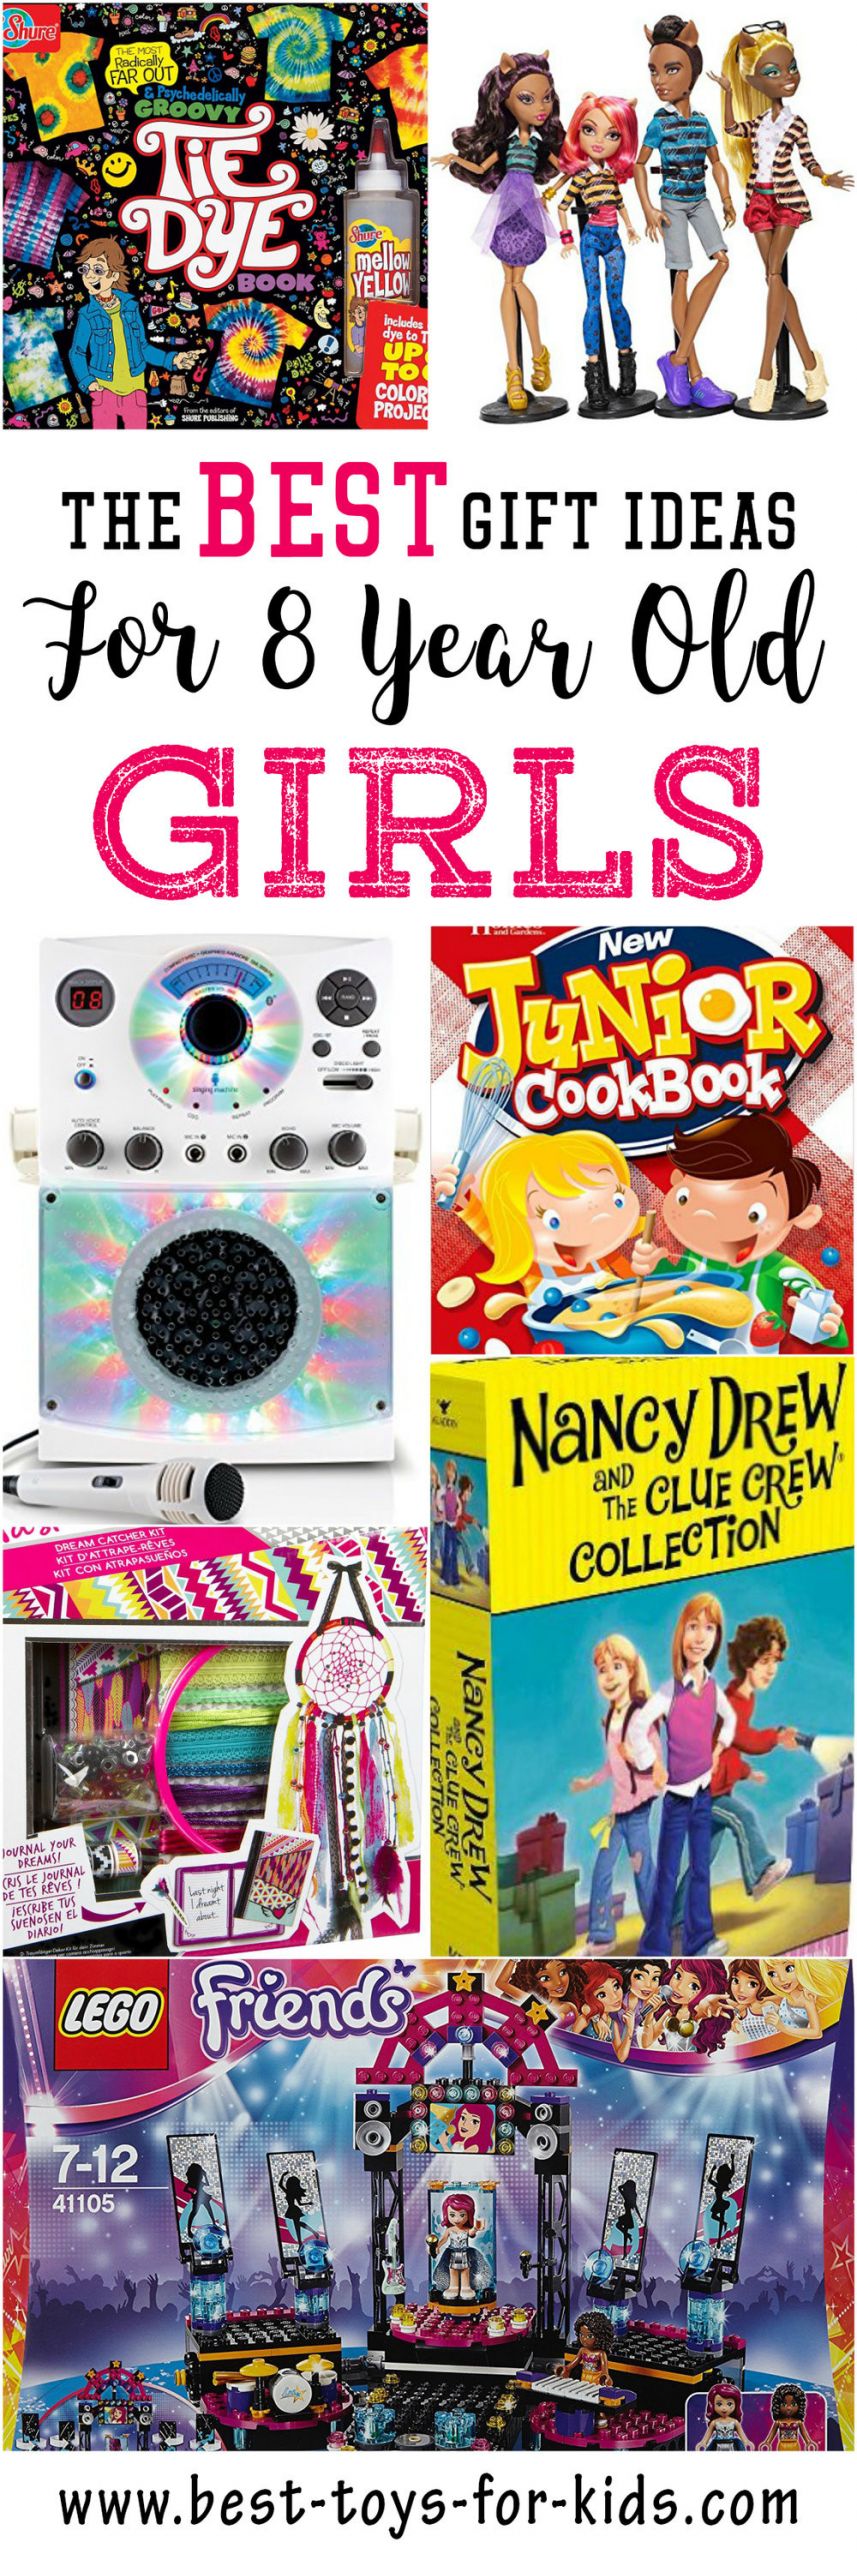 Gift Ideas For Eight Year Old Girls
 Best Gift Ideas for 8 Year Old Girls — Best Toys For Kids